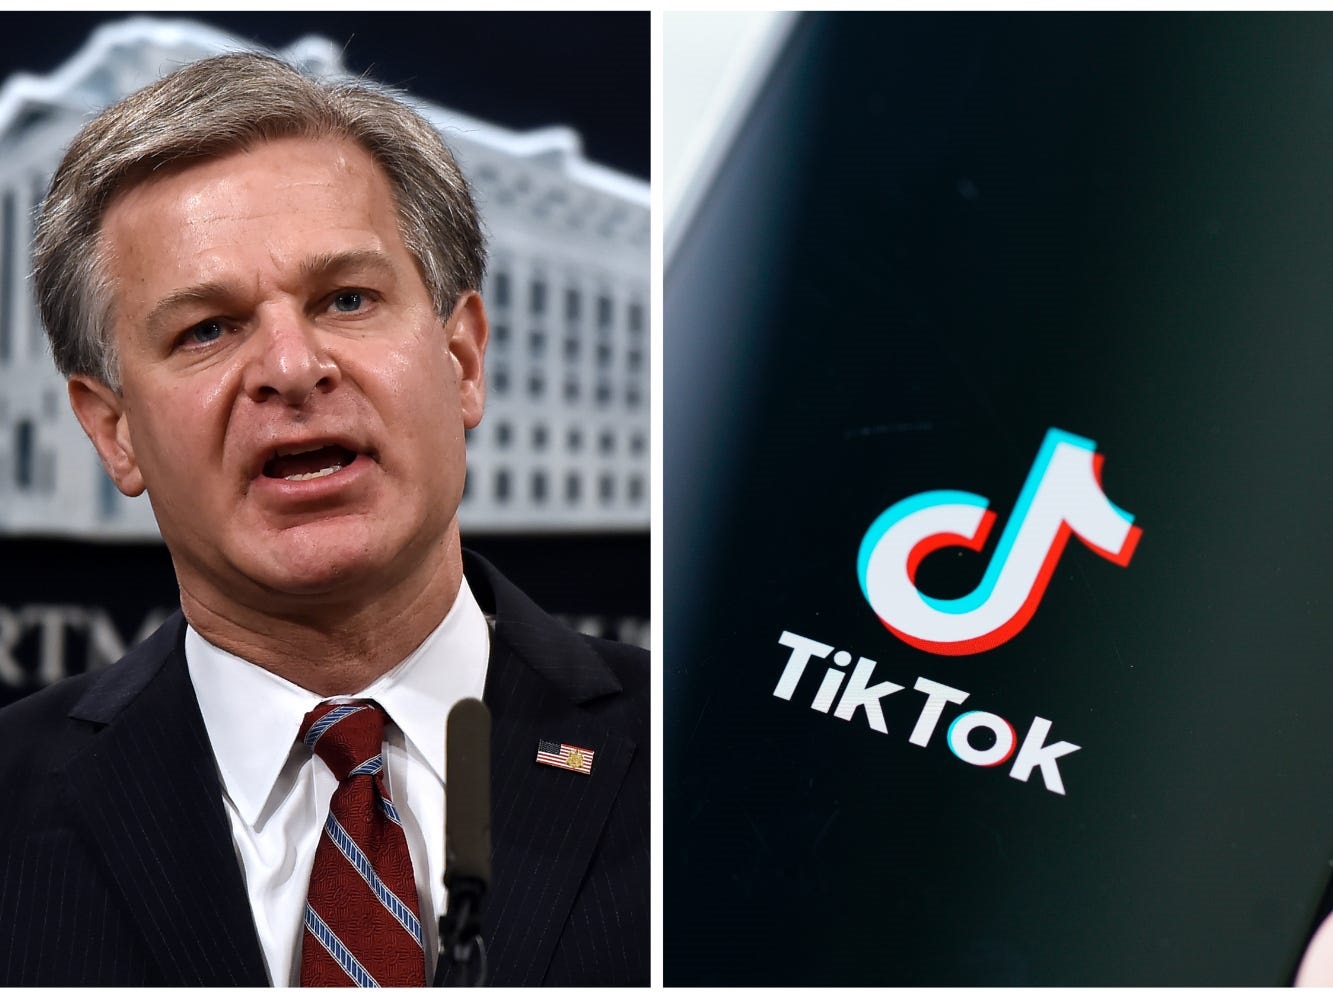 FBI director warns that TikTok could be exploited by China to collect user data for espionage